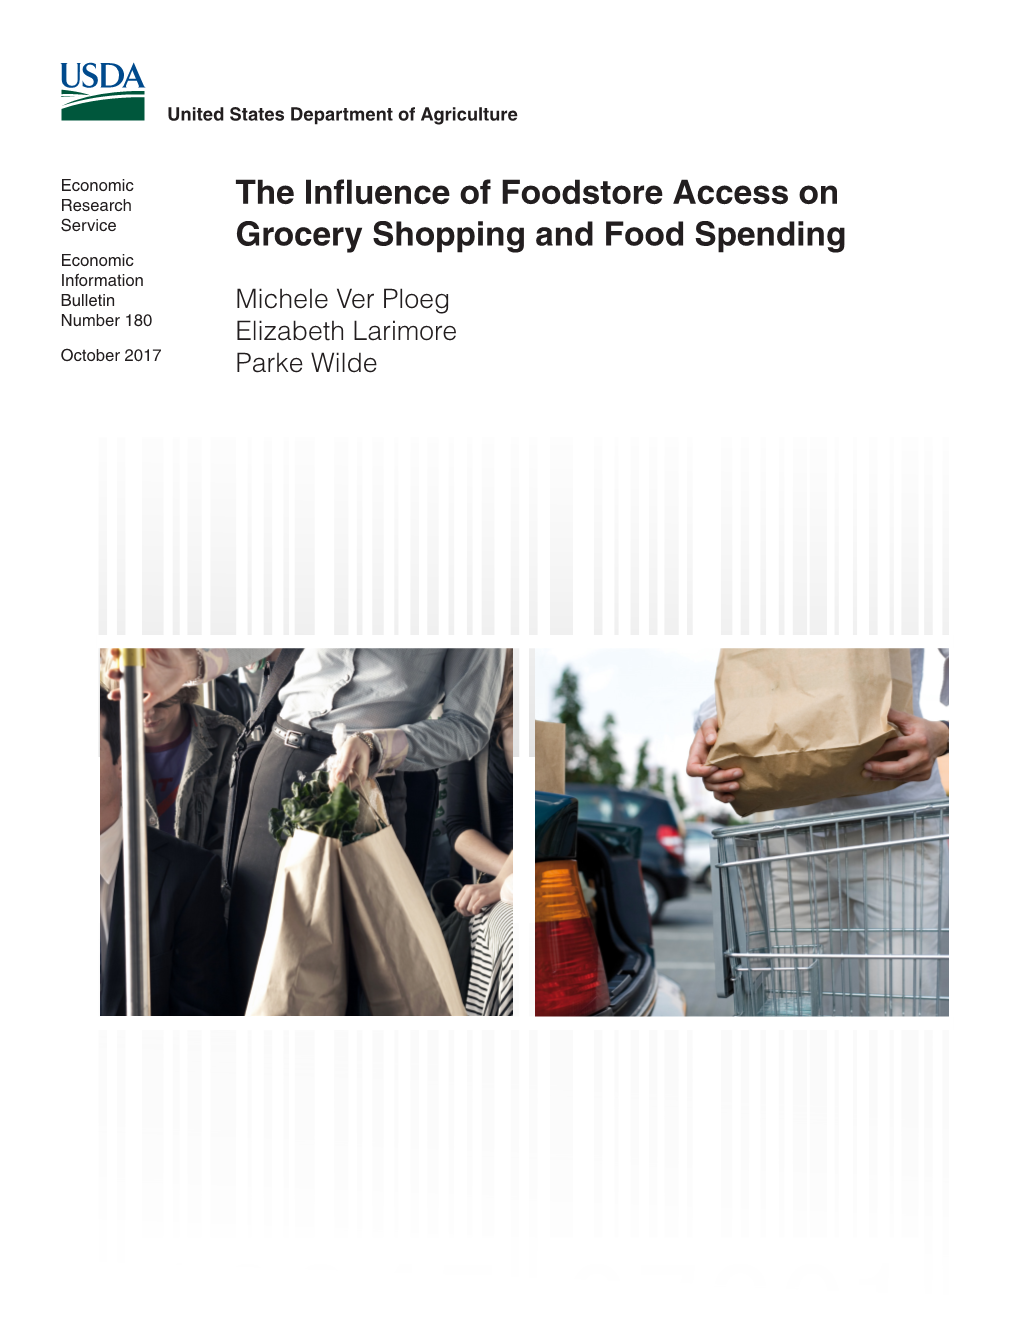 The Influence of Foodstore Access on Grocery Shopping and Food Spending, EIB-180, U.S